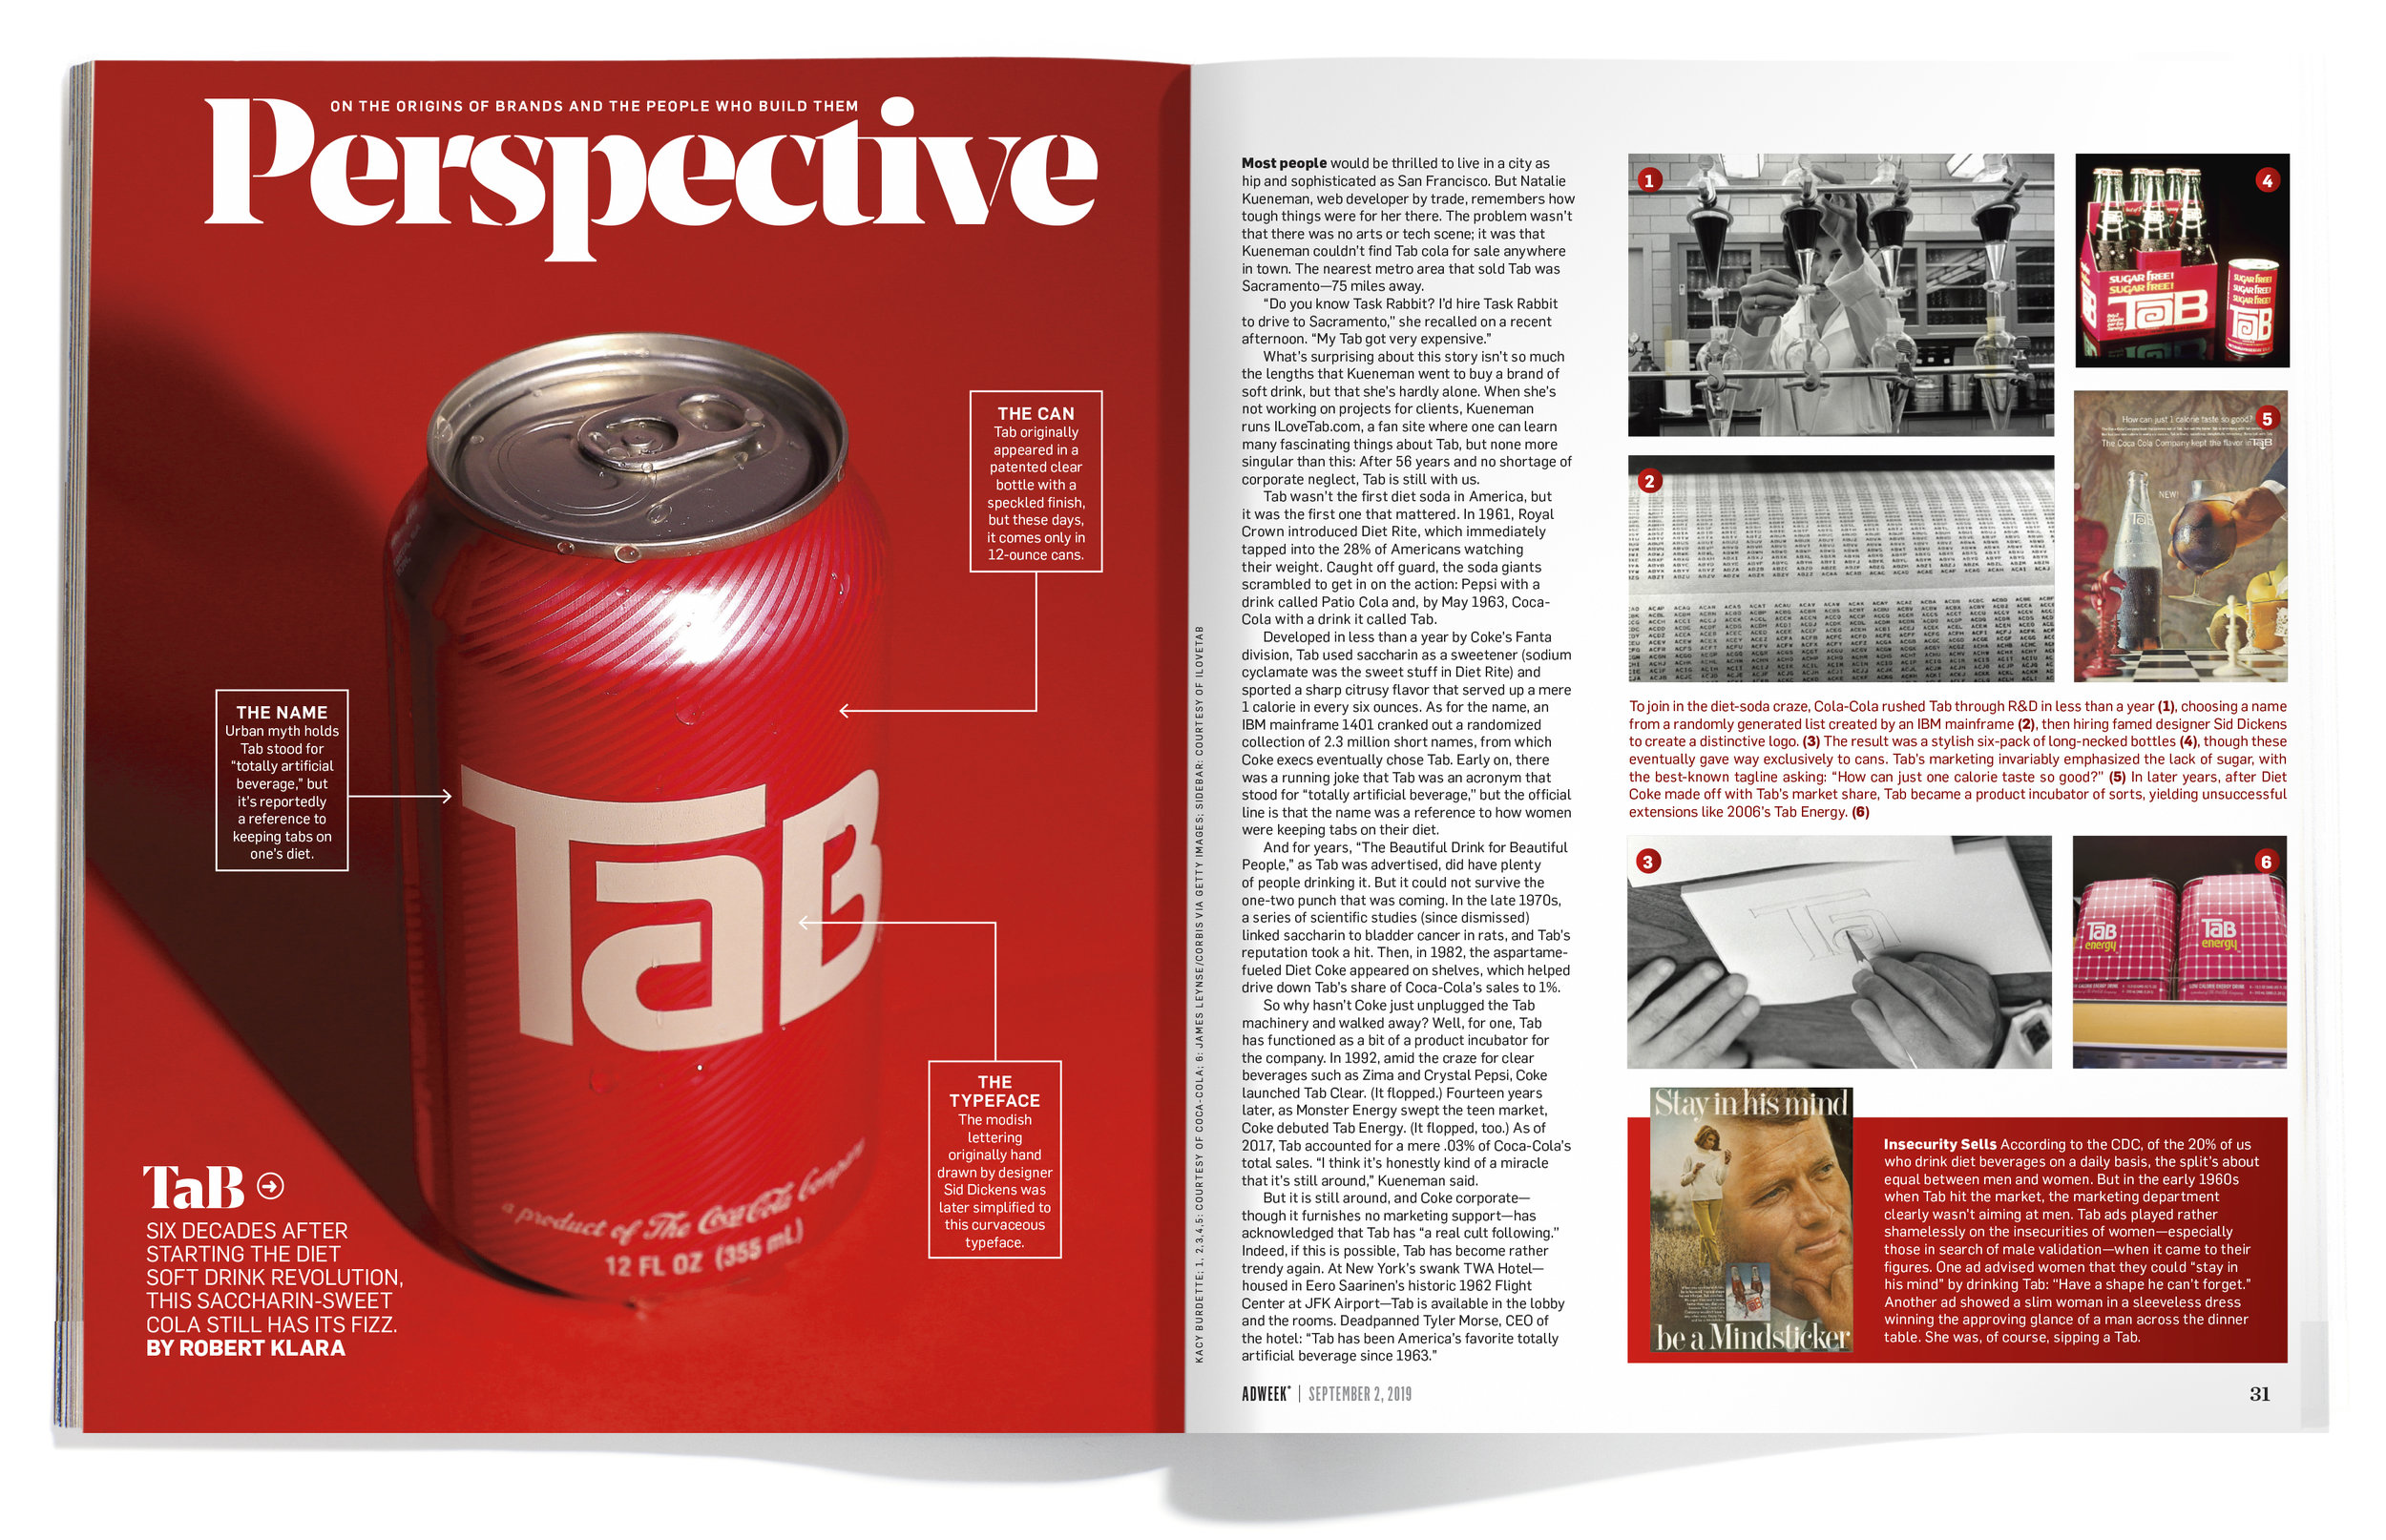   Adweek    TaB   Accounts for Just 1% of Coca-Cola’s Sales, So Why Is It Still Around?  